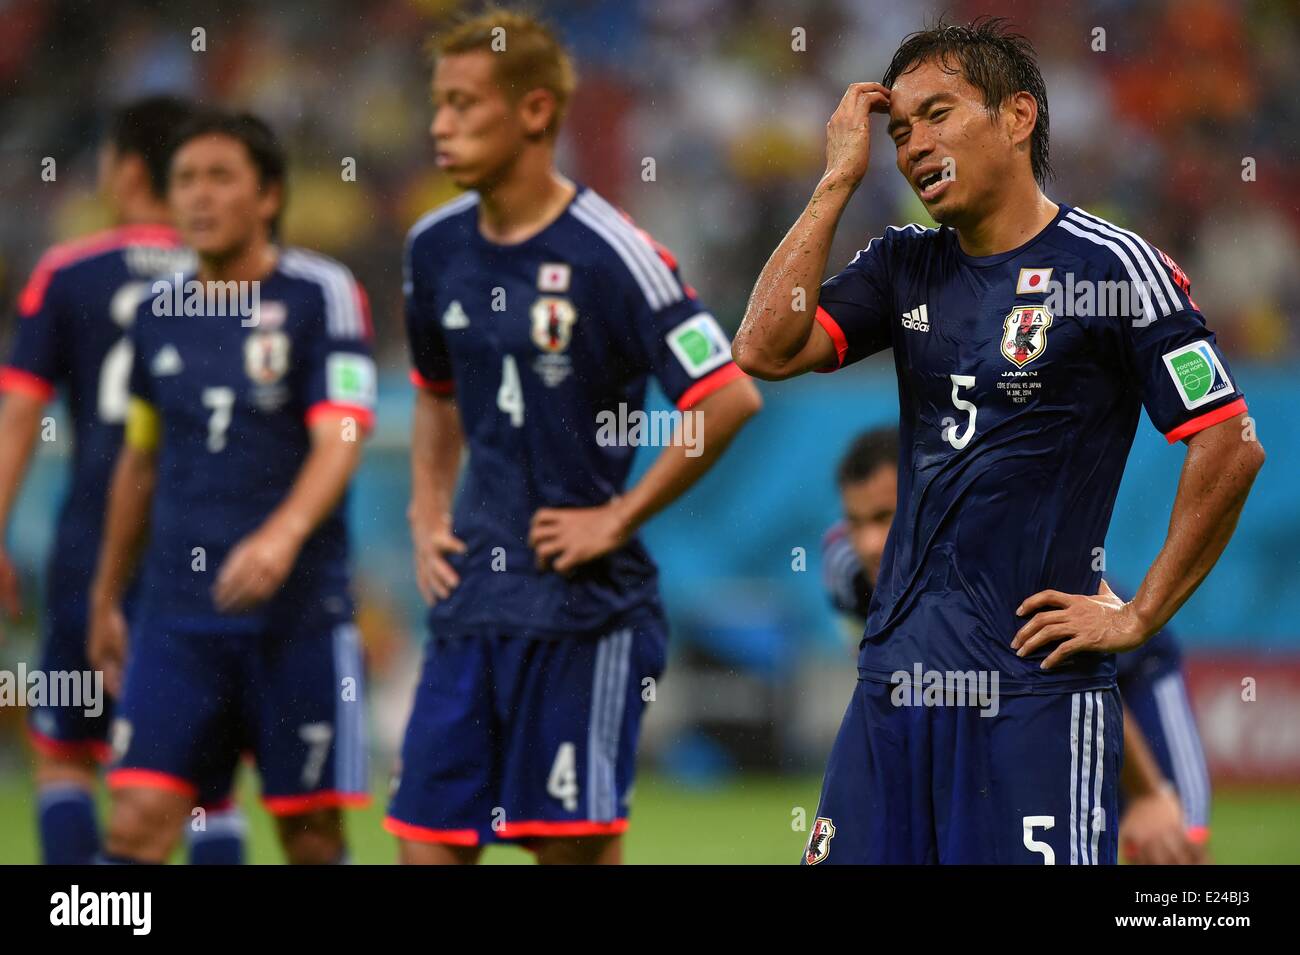 Recife, Brazil. 14th June, 2014. Yuto Nagatomo (JPN)  Yuto Nagatomo of Japan looks dejected during the FIFA World Cup Brazil 2014 Group C match between Cote d'Ivoire 2-1 Japan at Arena Pernambuco in Recife, Brazil . Credit:  FAR EAST PRESS/AFLO/Alamy Live News Stock Photo